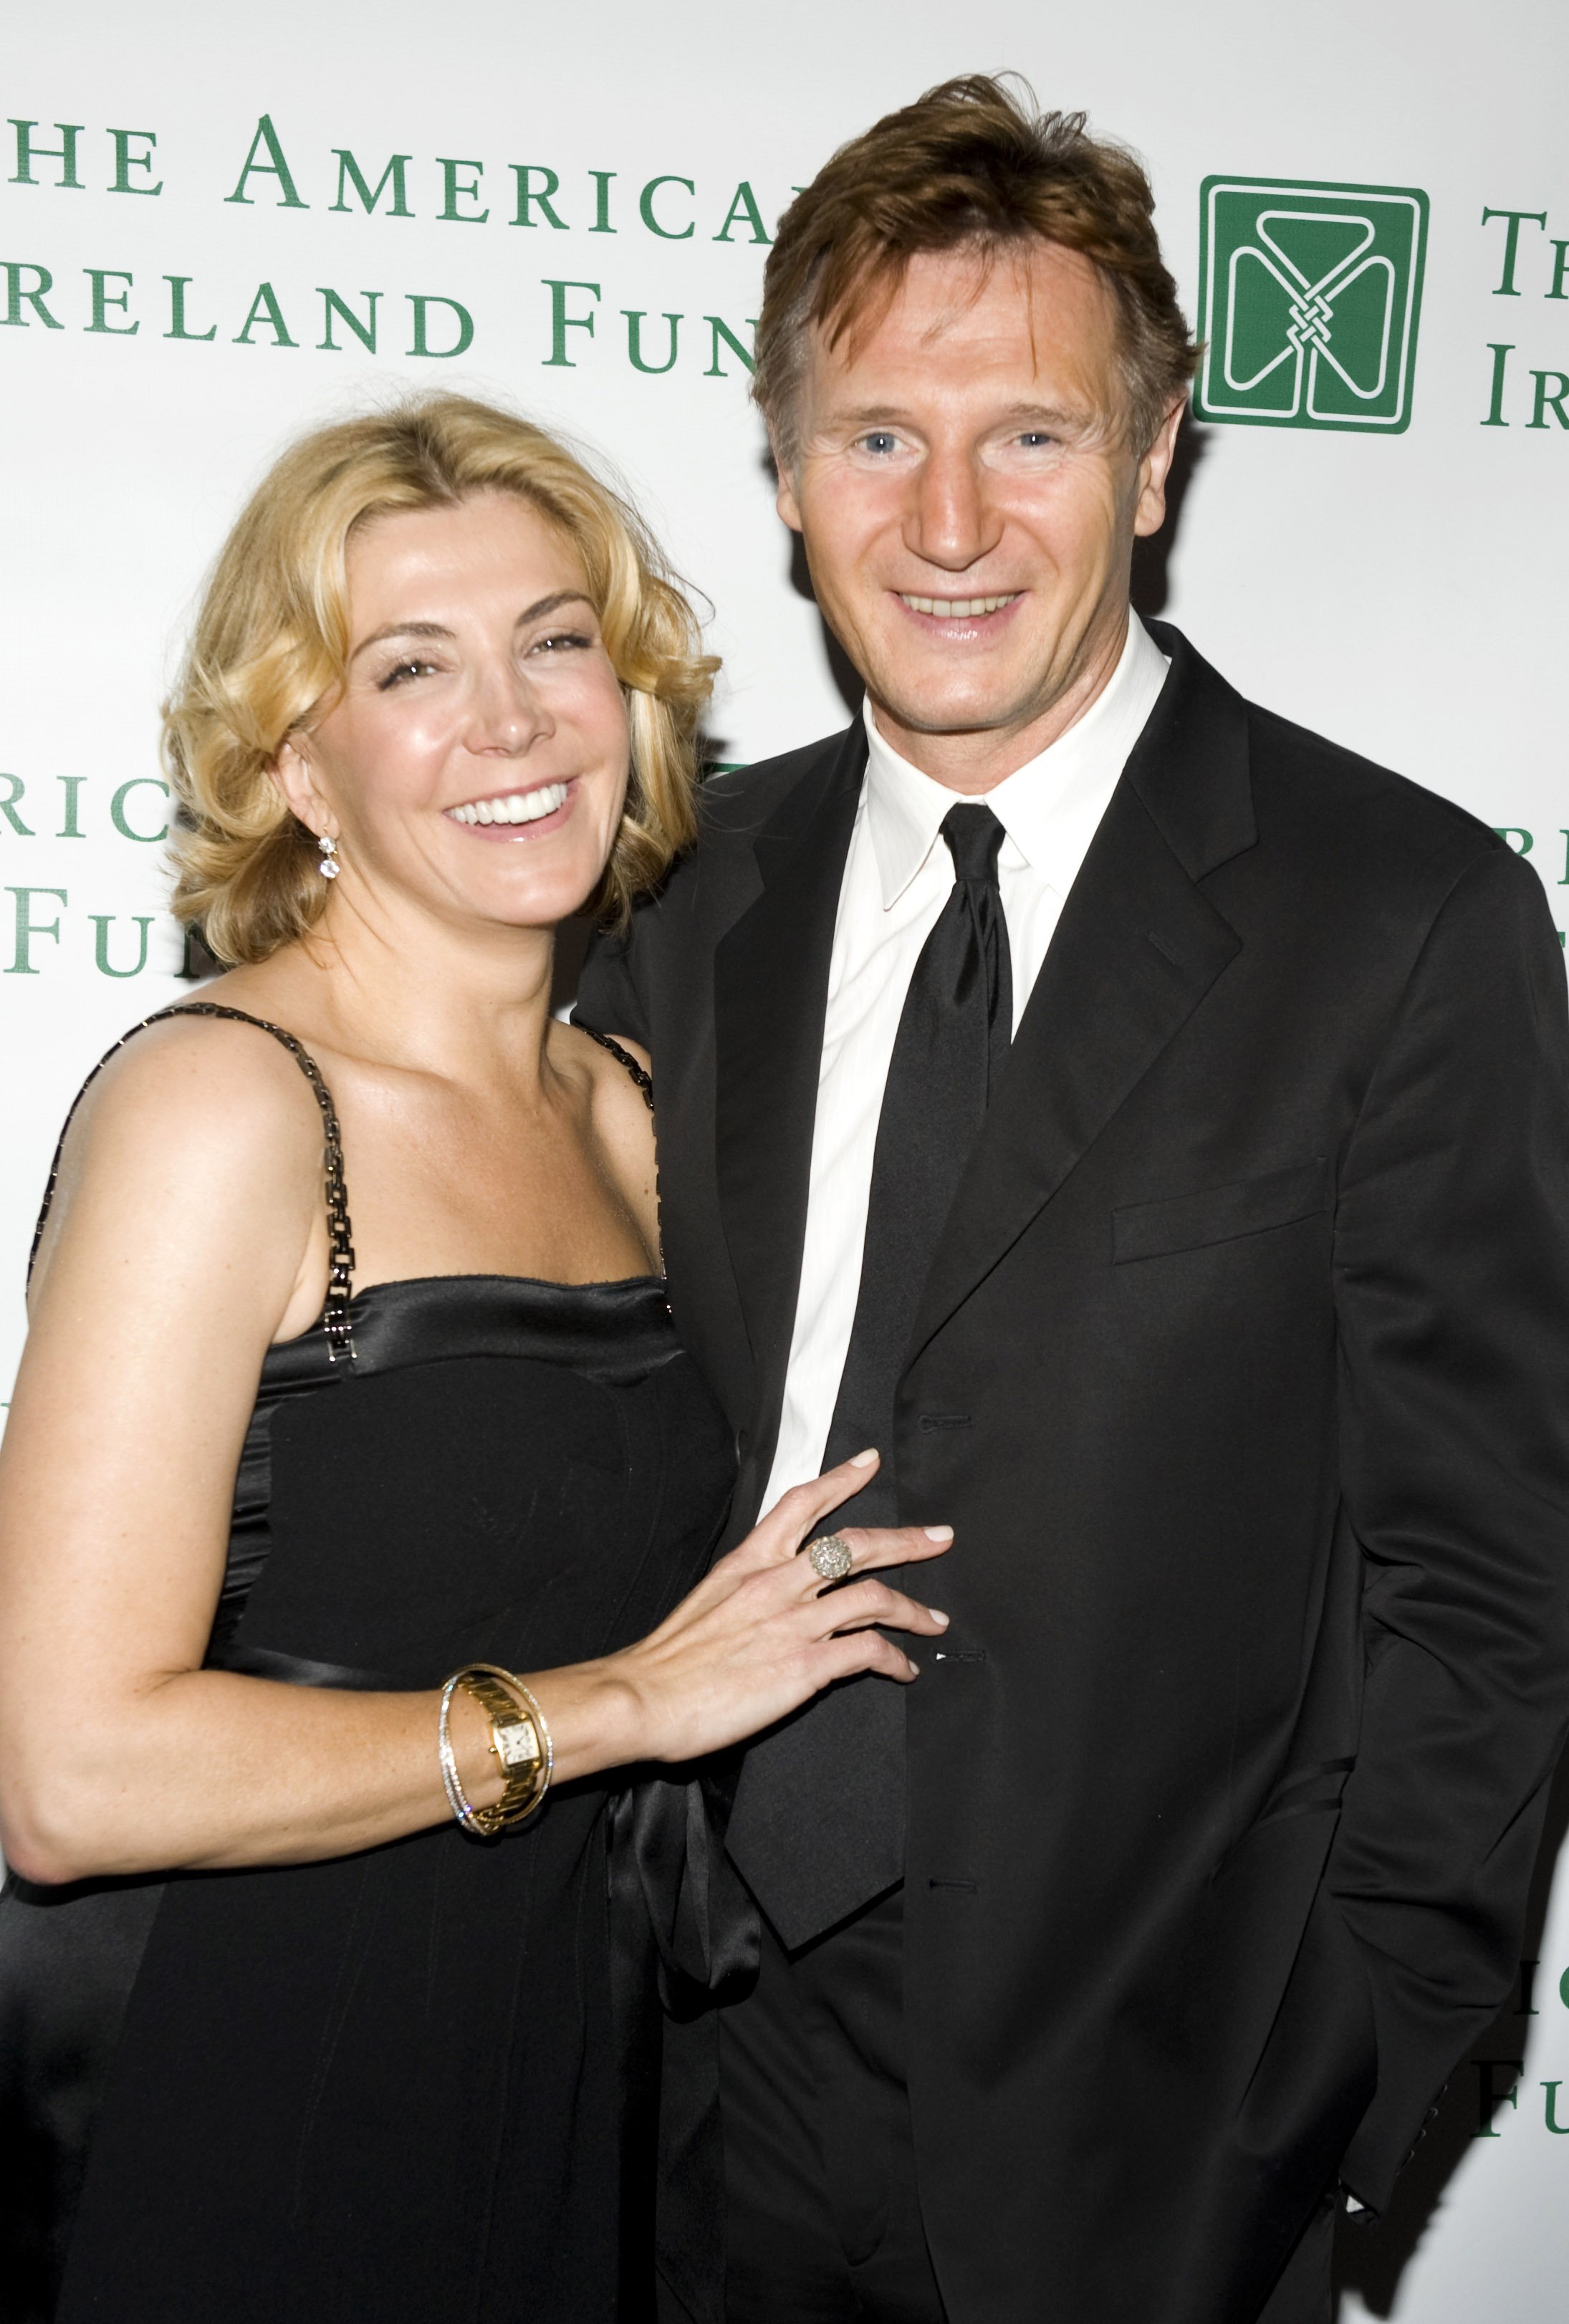 Liam Neeson with wife Natasha Richardson attending the 33rd Annual American Ireland Fund Gala at The Tent at Lincoln Center on May 08, 2008 in New York City. / Source: Getty Images